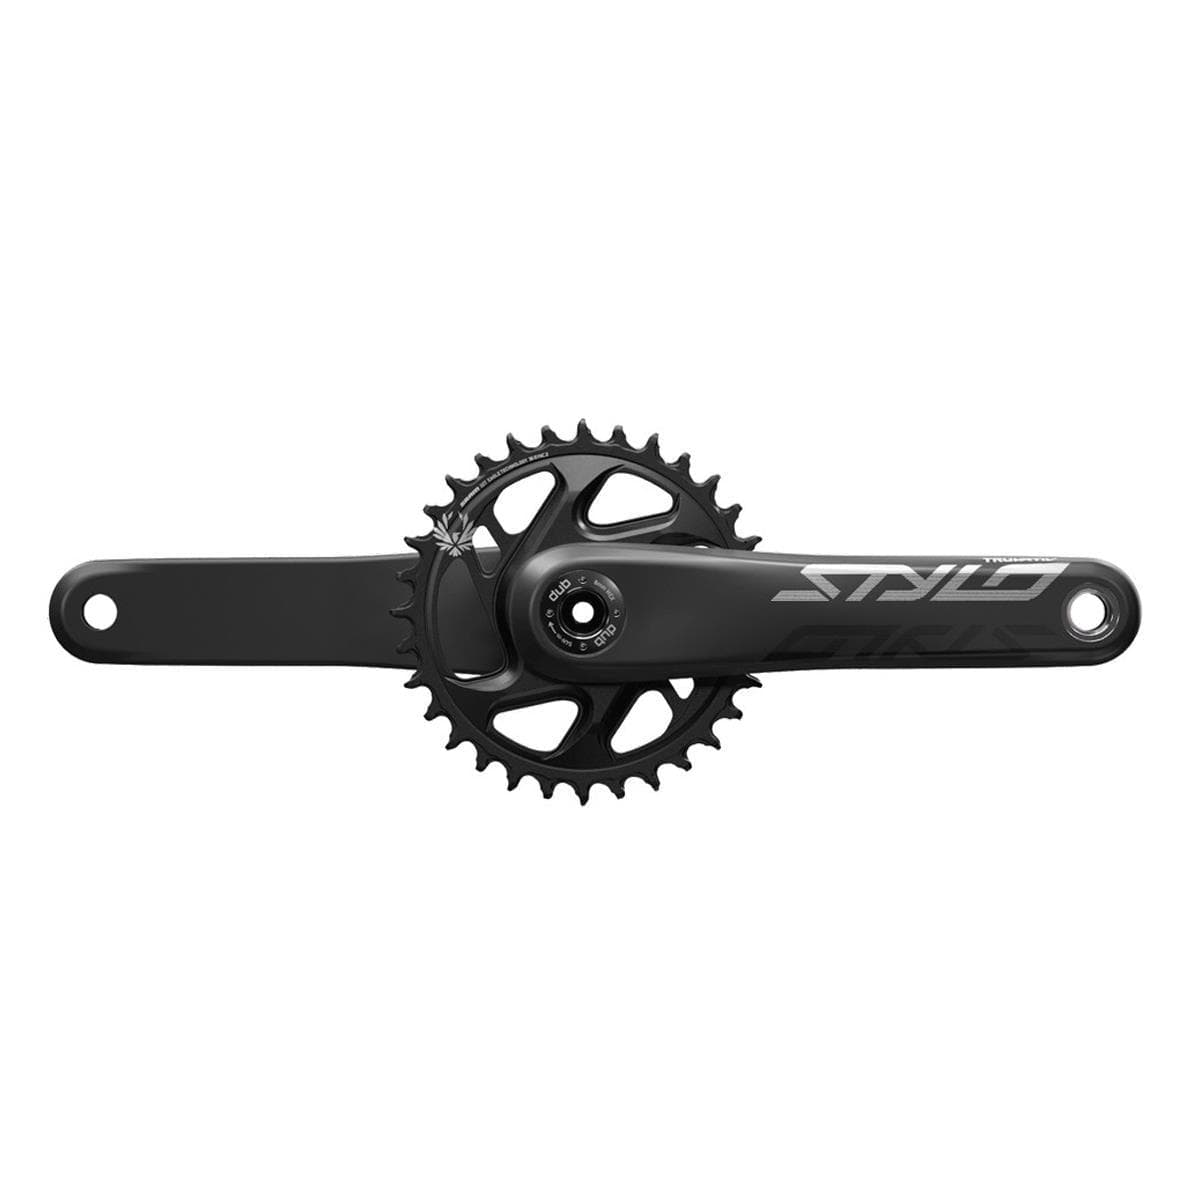 Truvativ Crank Stylo Carbon Eagle Dub 12S 170 W Direct Mount32T X-Sync 2 Chainring Black (Dub Cups/Bearings Not Included): Black 170Mm